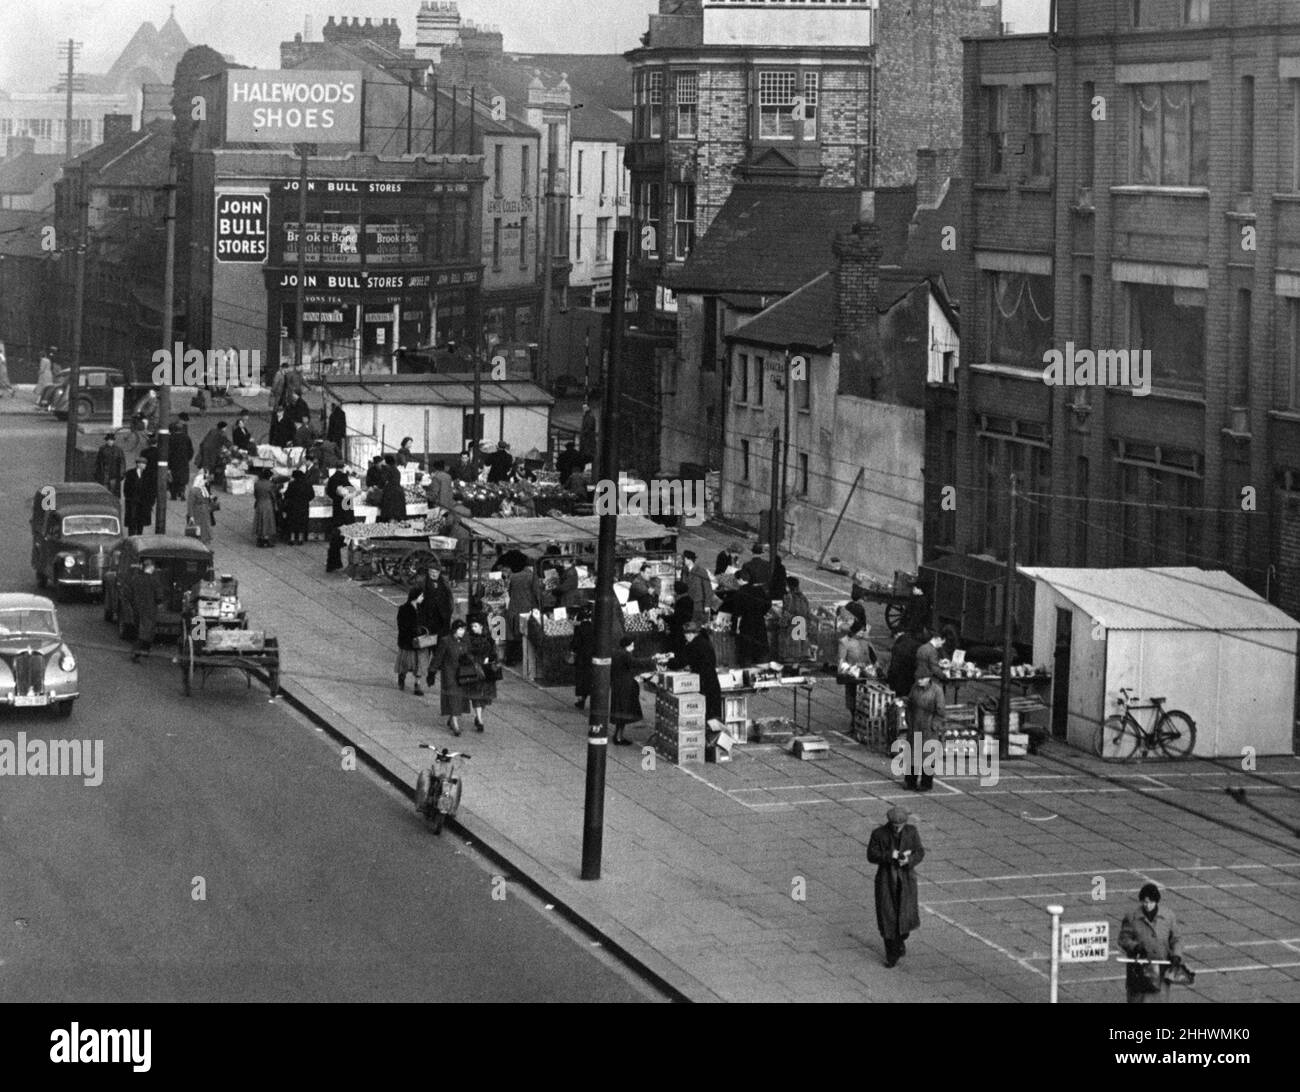 New market site in nearby Mill Lane, Cardiff, Wales, Saturday 2nd July 1955.  The stall holders have been relocated from Hayes Open Air Market (near the Central Library).   Halewood's Shoes John Bull Stores Stock Photo